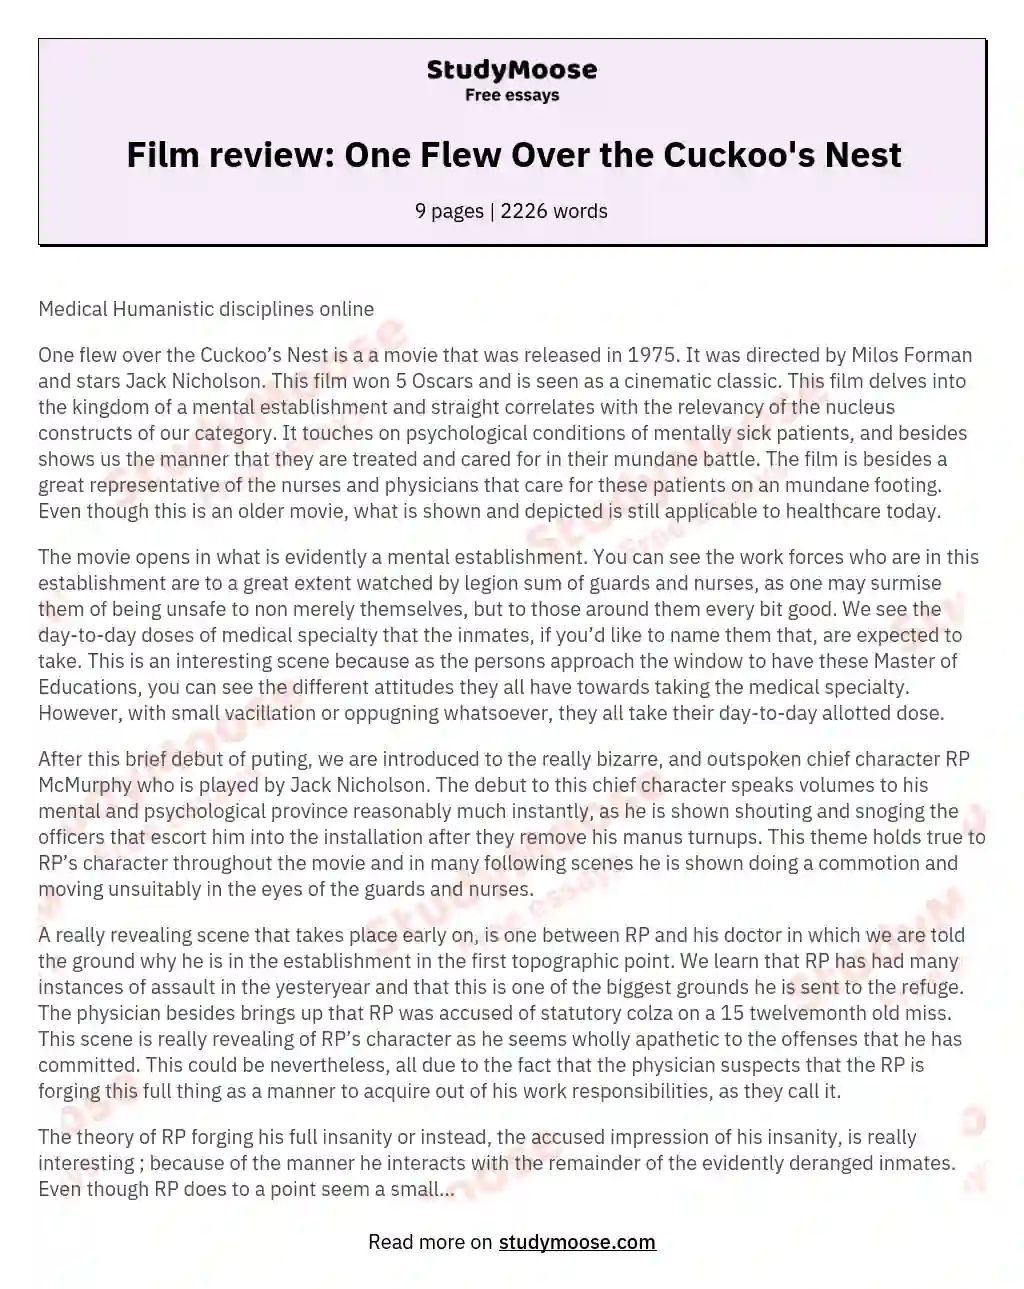 Film review: One Flew Over the Cuckoo's Nest